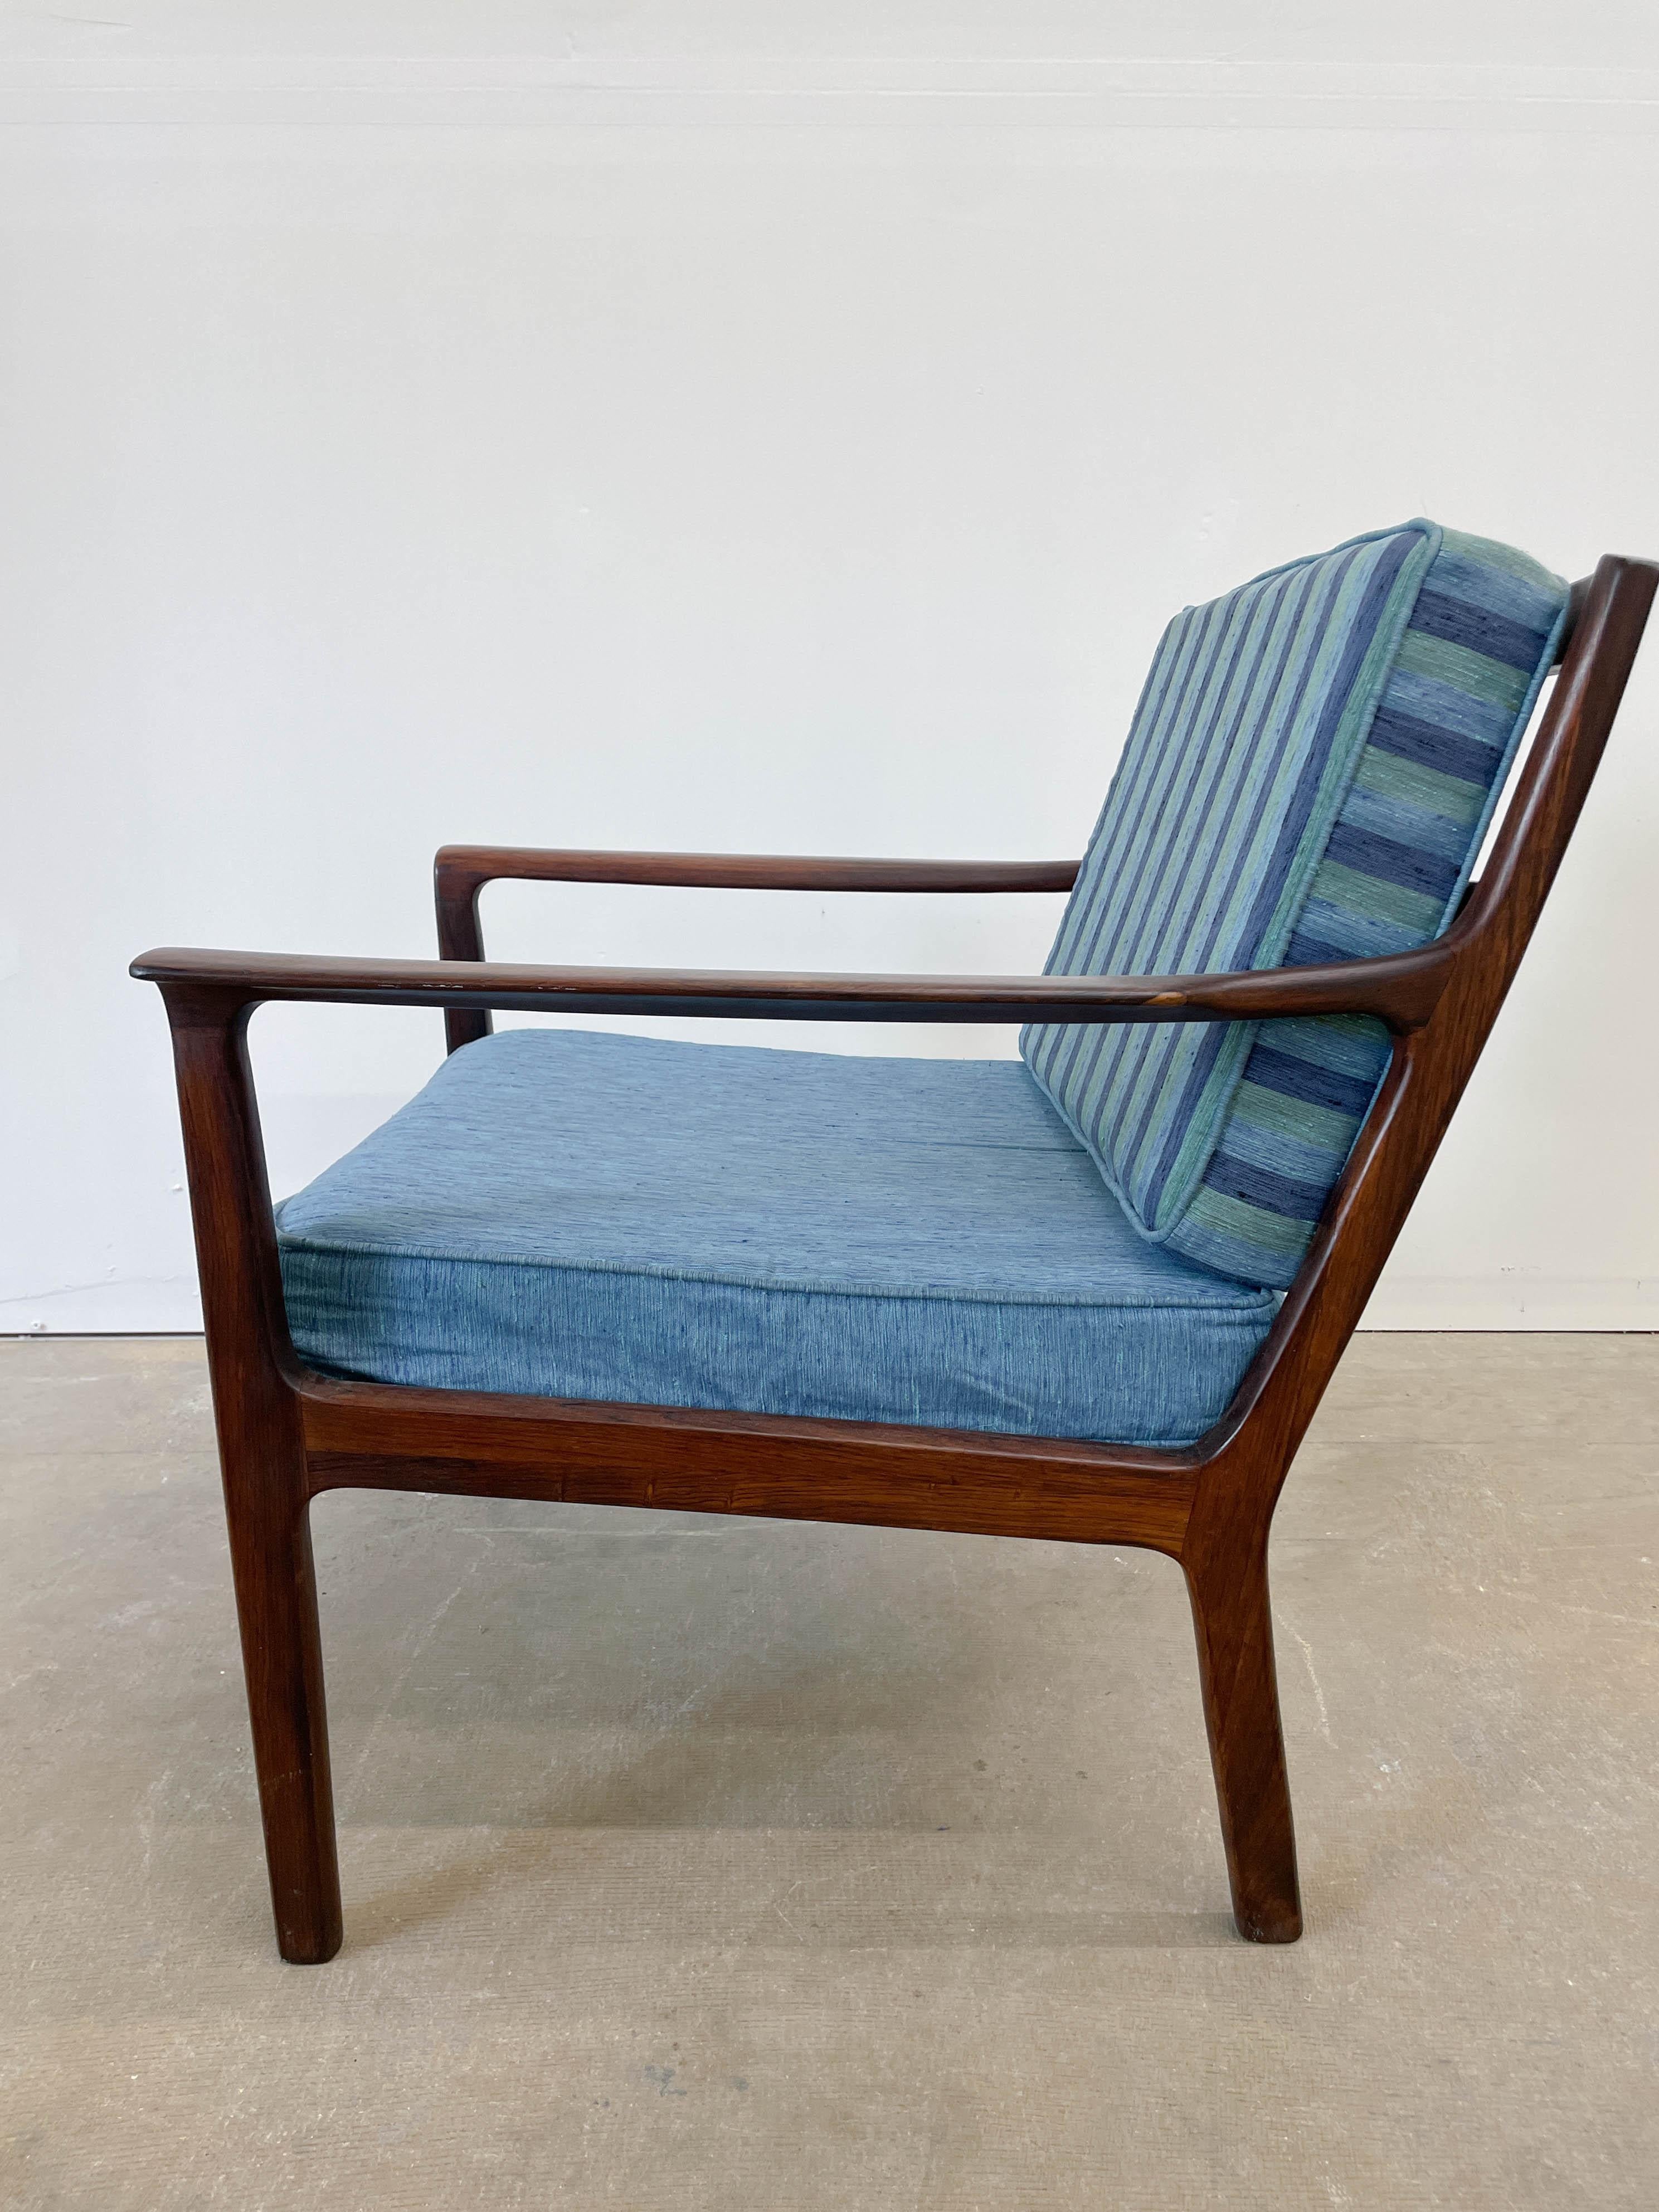 Beautifully crafted from solid Brazilian Rosewood, this Mid-Century Modern lounge chair is clearly heavily influenced by Norwegian designer Fredrik A. Kayser's nearly identical lounge chair. It is believed this chair was made in Sweden in the 1960s,